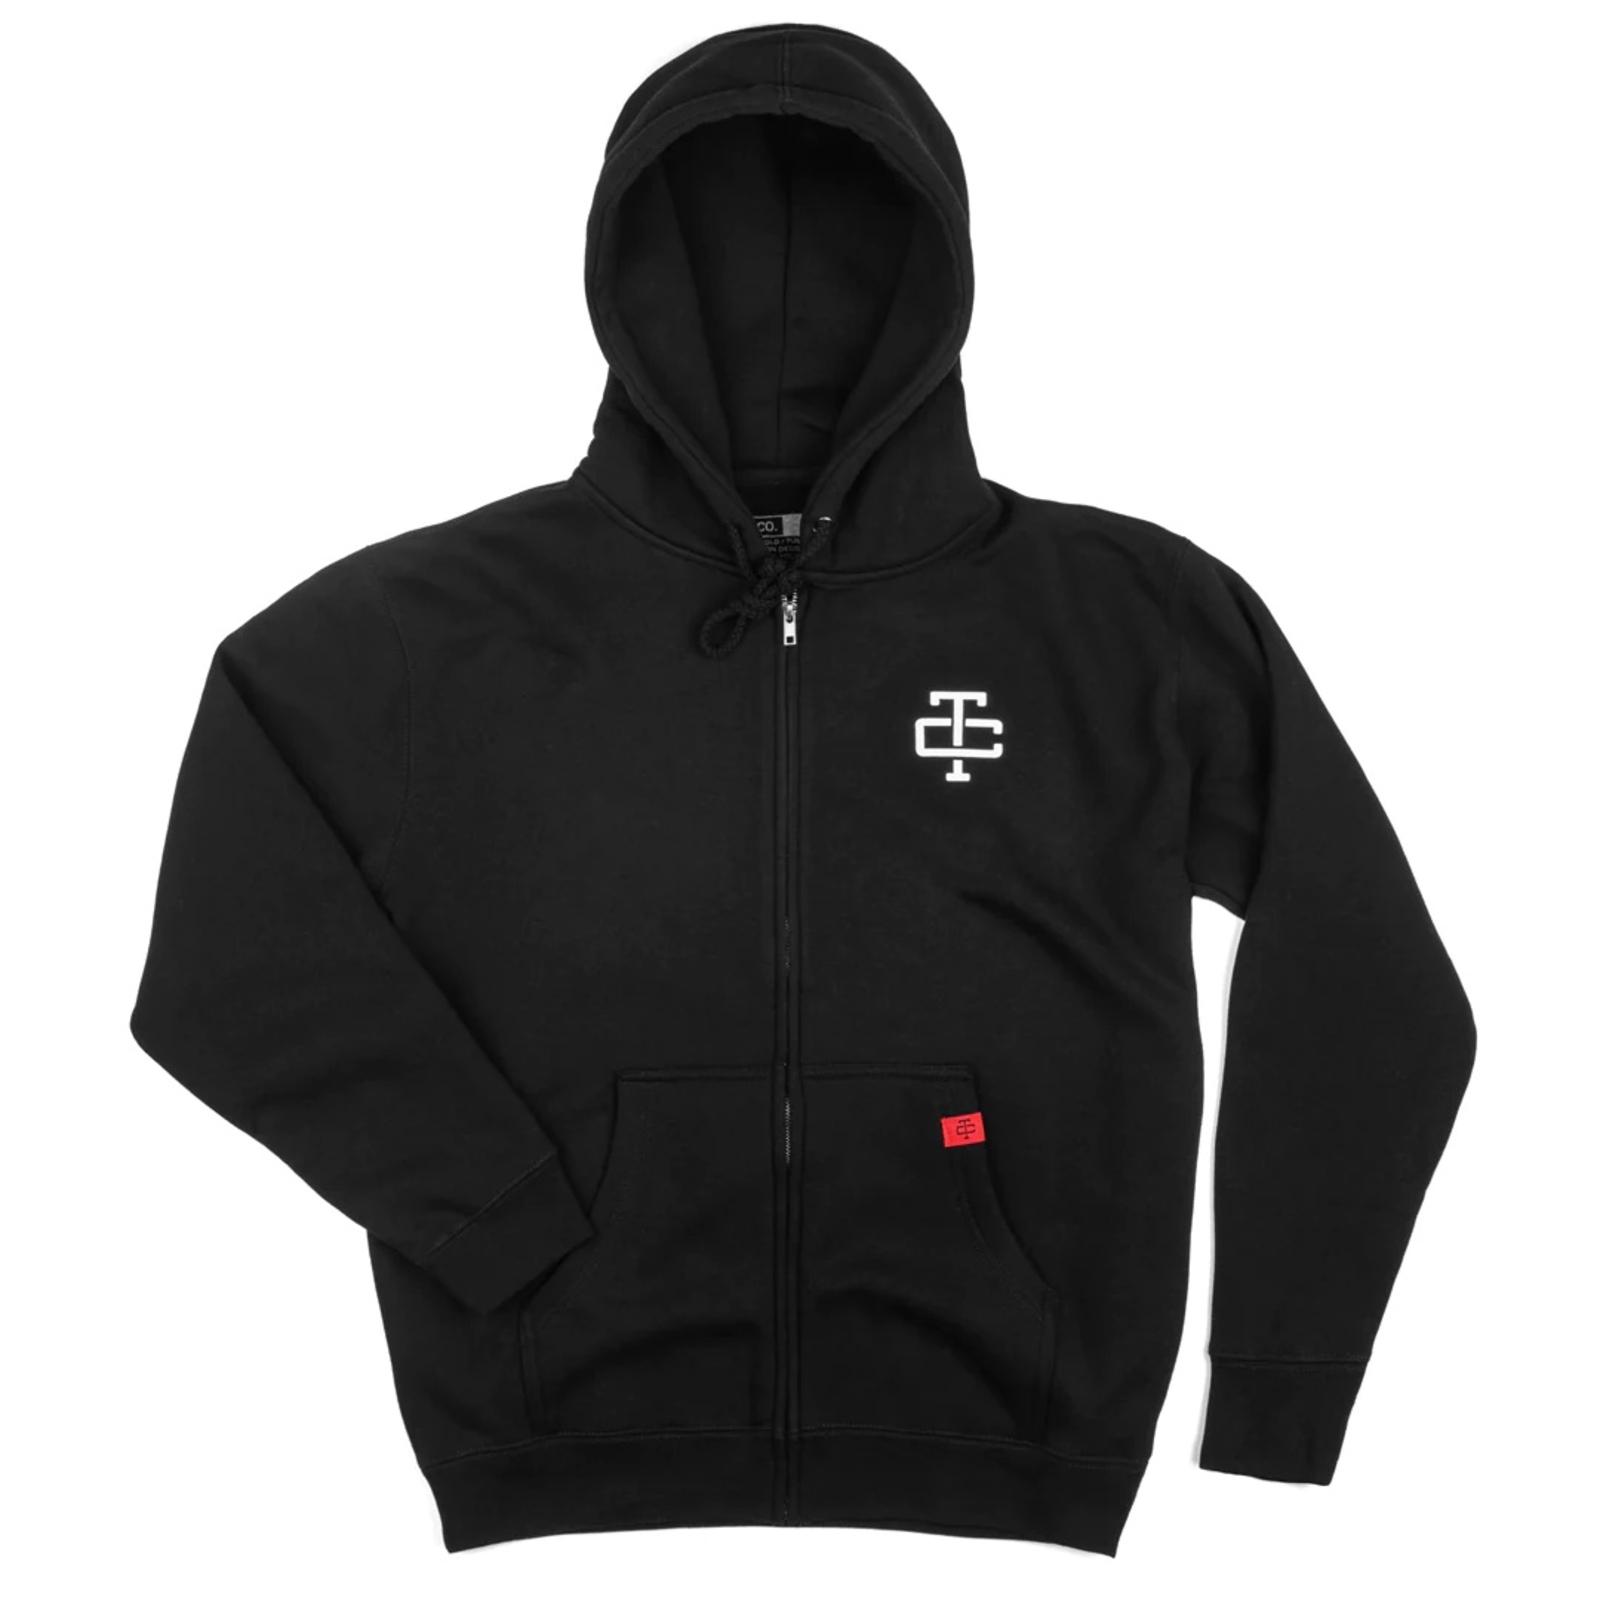 Troll Clothing Co. Alado Zip-Up Hoodie FONT VIEW